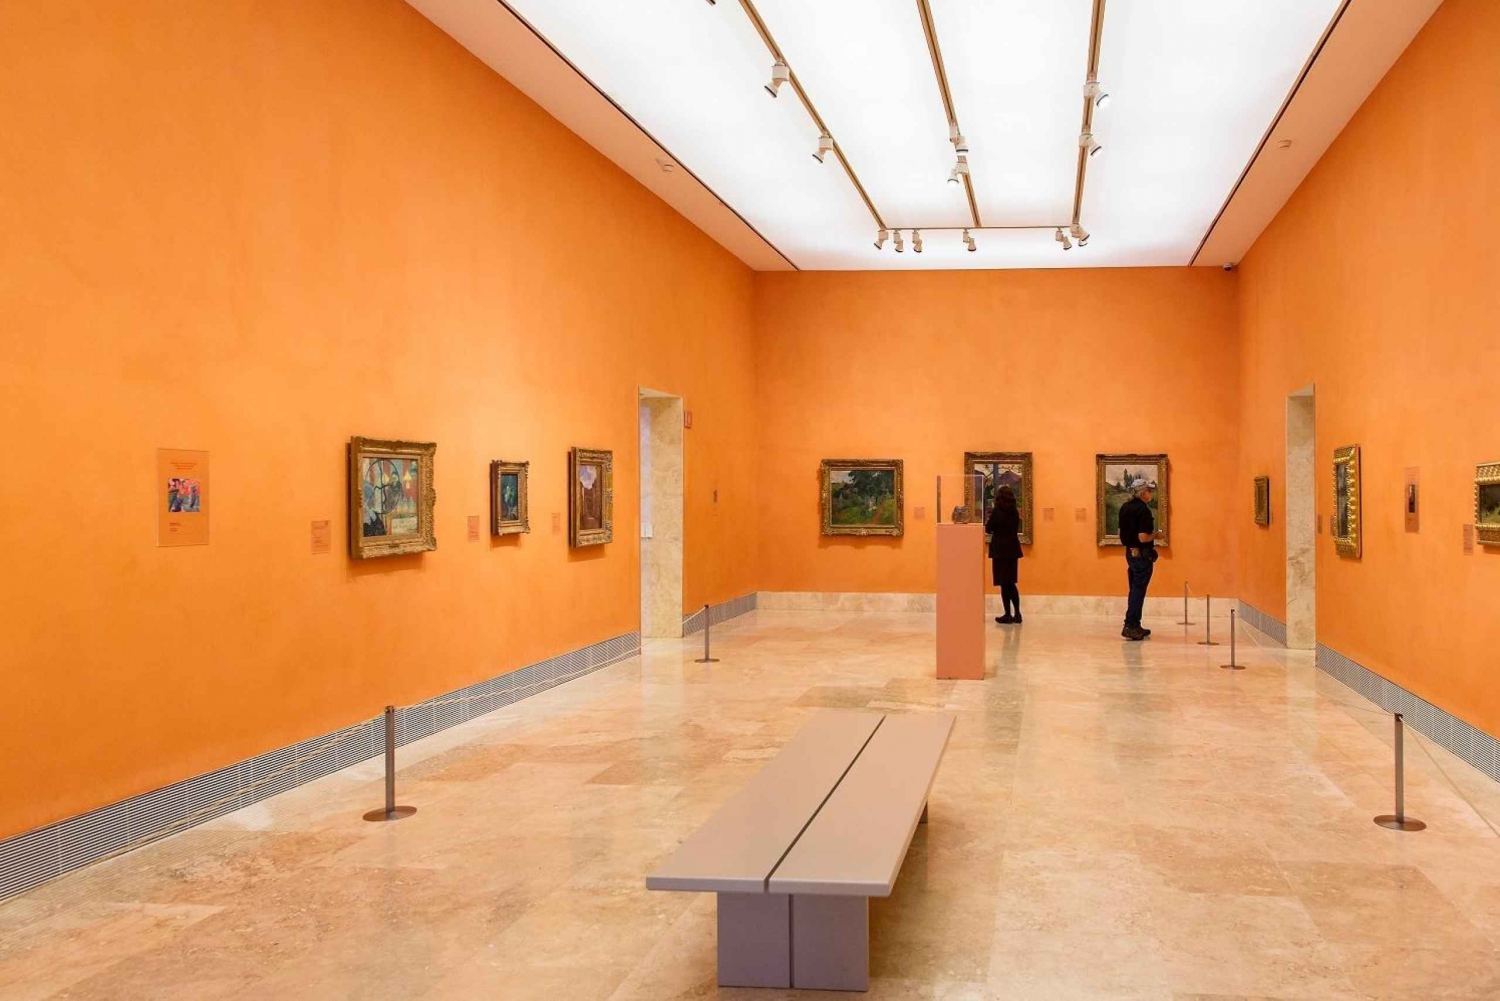 Madrid: Thyssen-Bornemisza Museum Ticket and Guided Tour